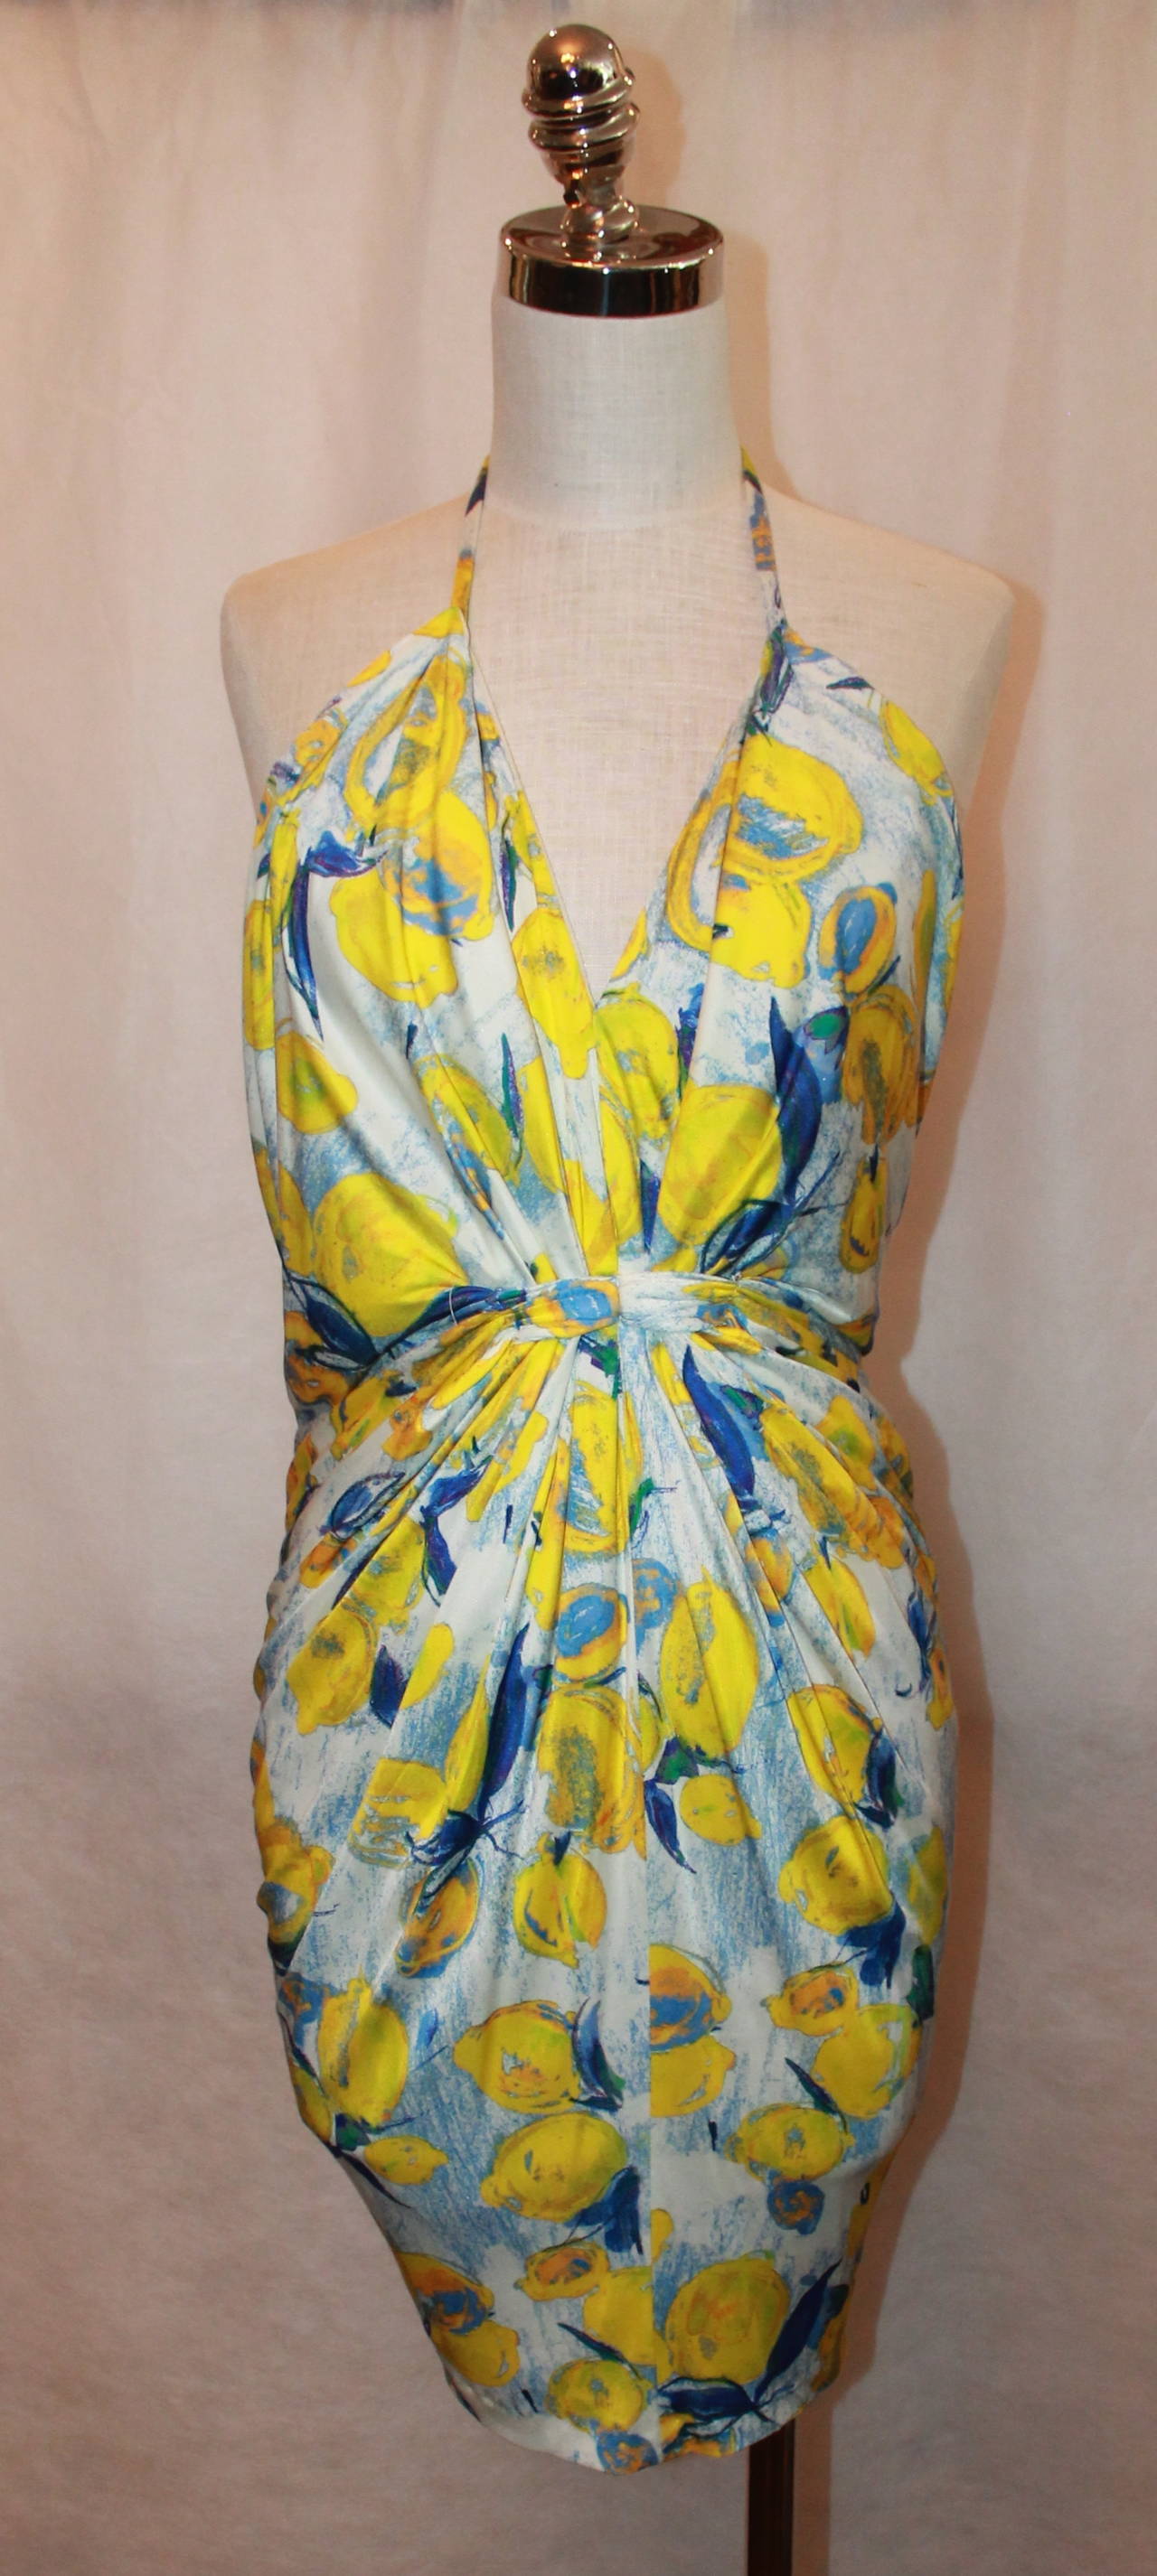 Blumarine Multi Color Blue, White, and Yellow Print Halter Dress with Gathering in the Center. This Small Sized Dress has a Tapered and Loose Fit and is in Excellent Condition.

Fabric:
Silk Jersey

Measurements:
Bust: up to 34 